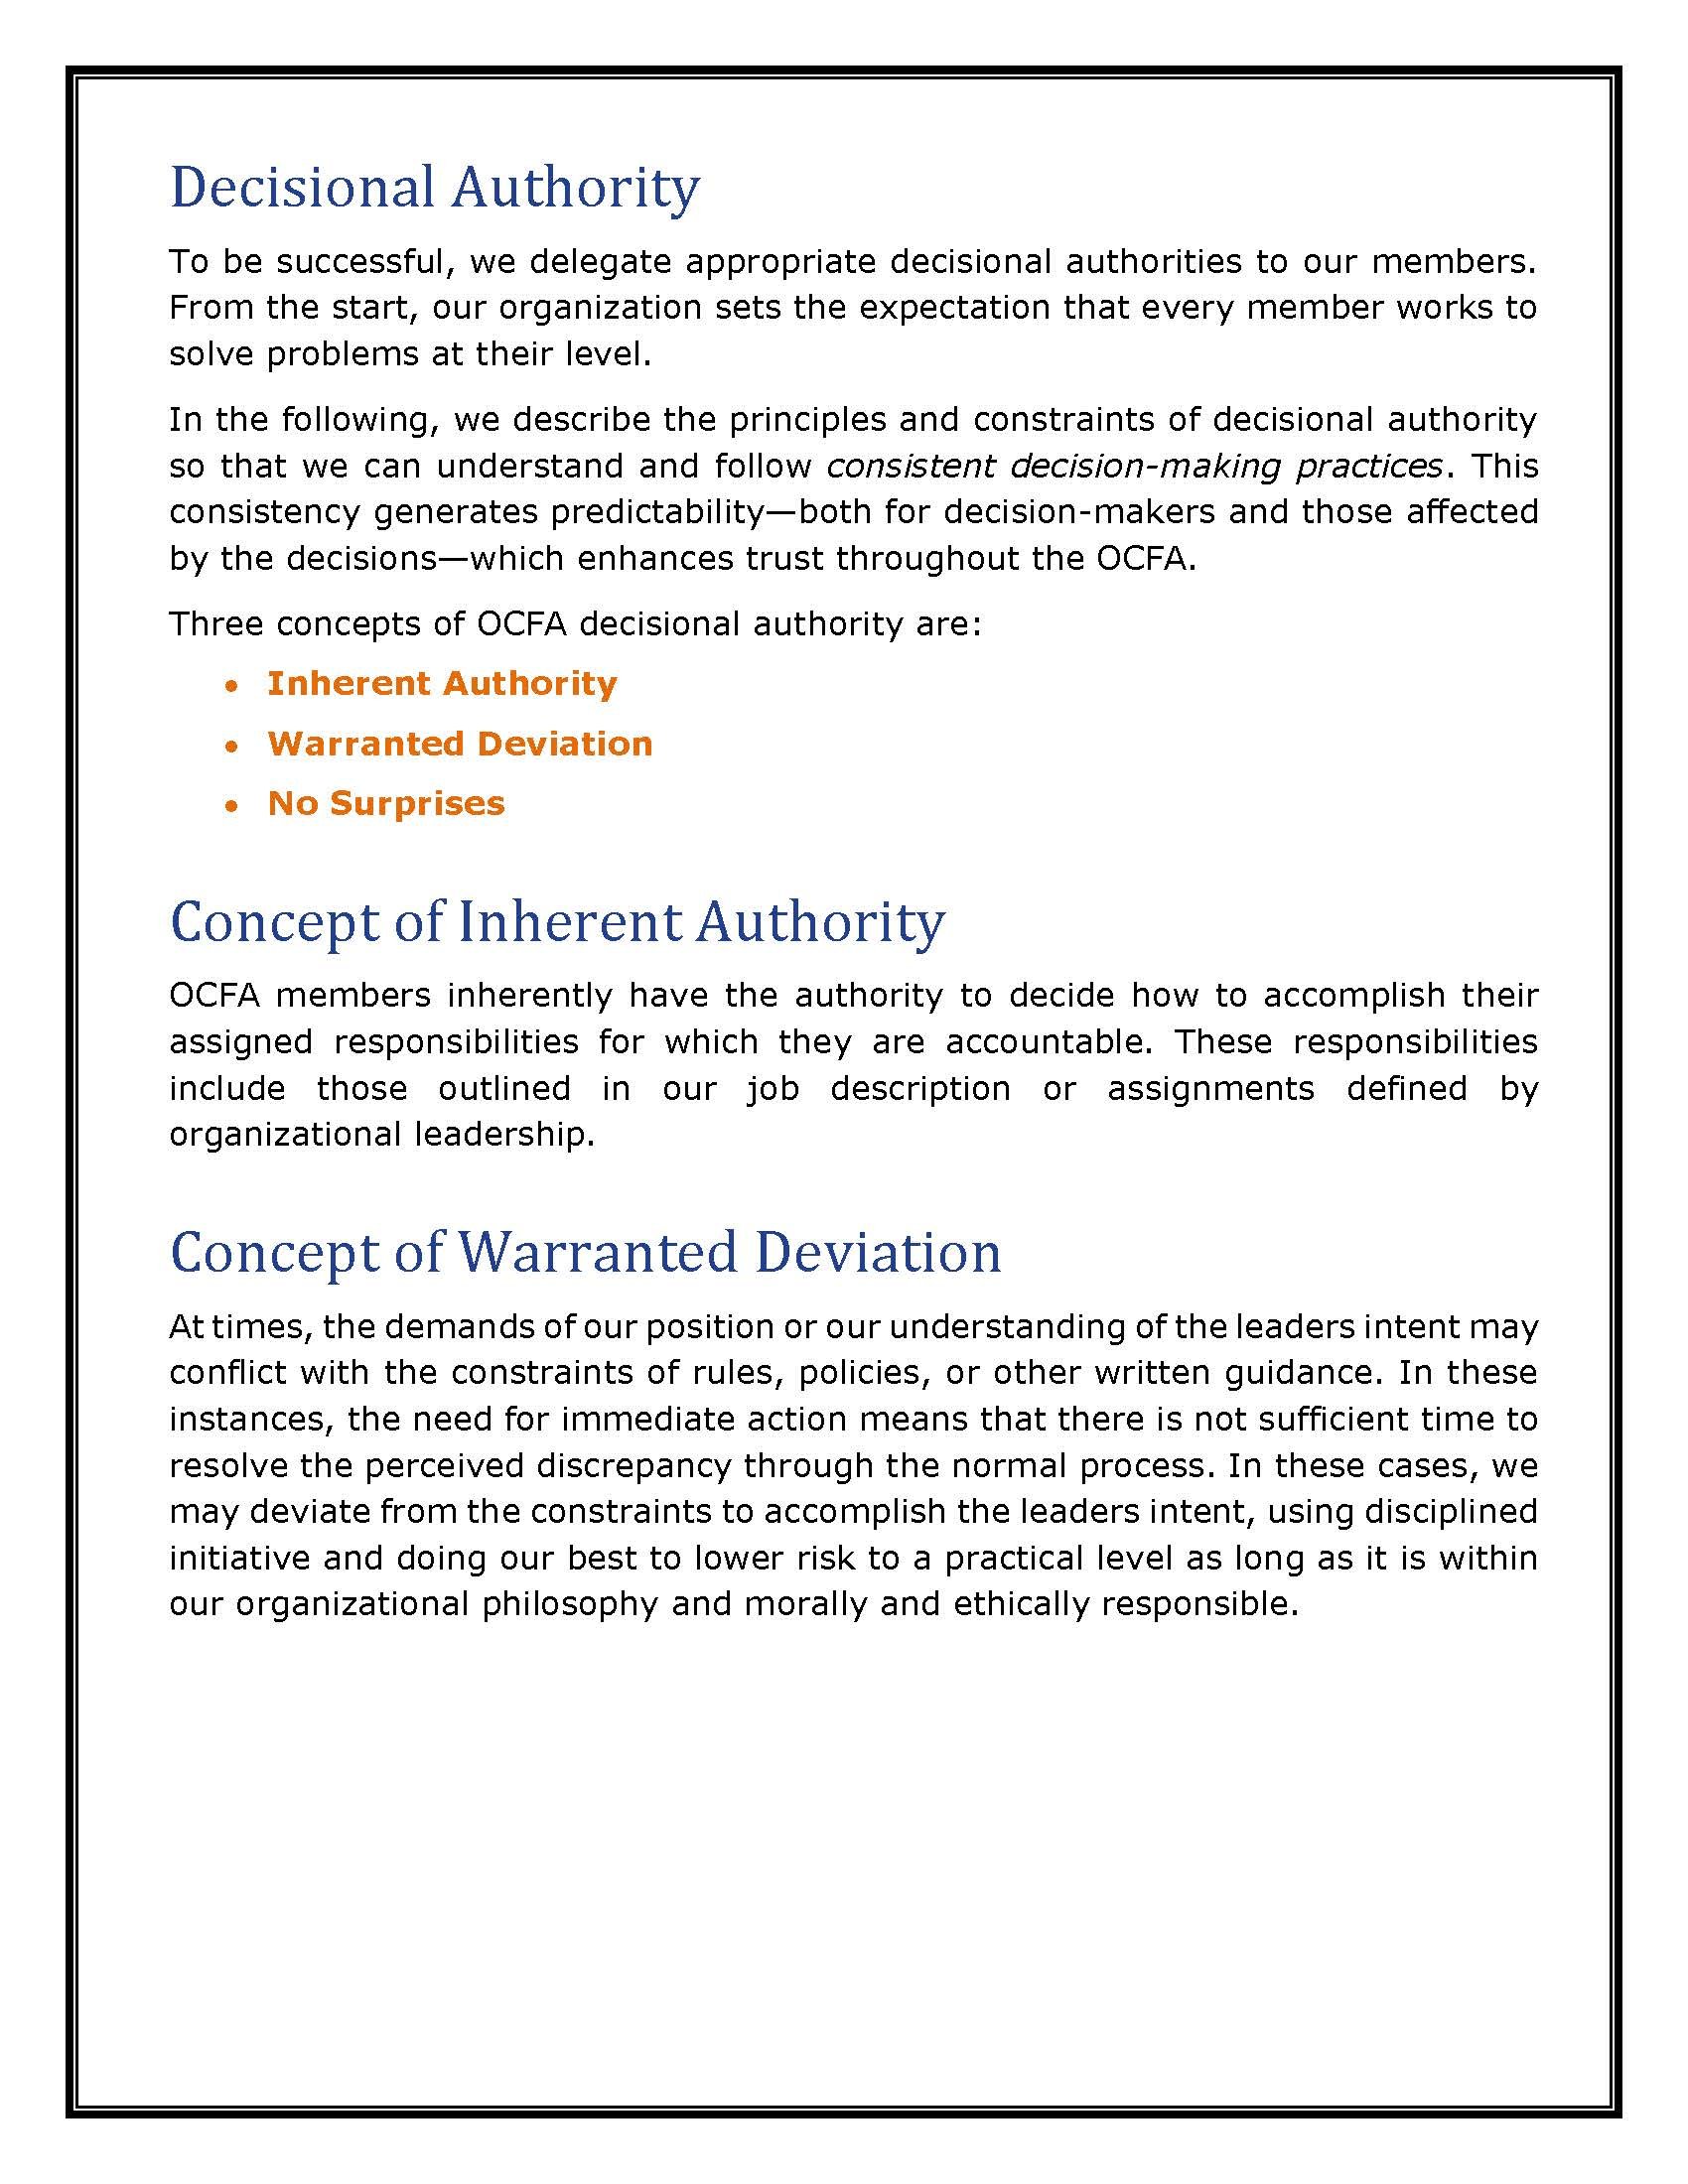 Leaders Intent Based Decisions #3_Page_05.jpg